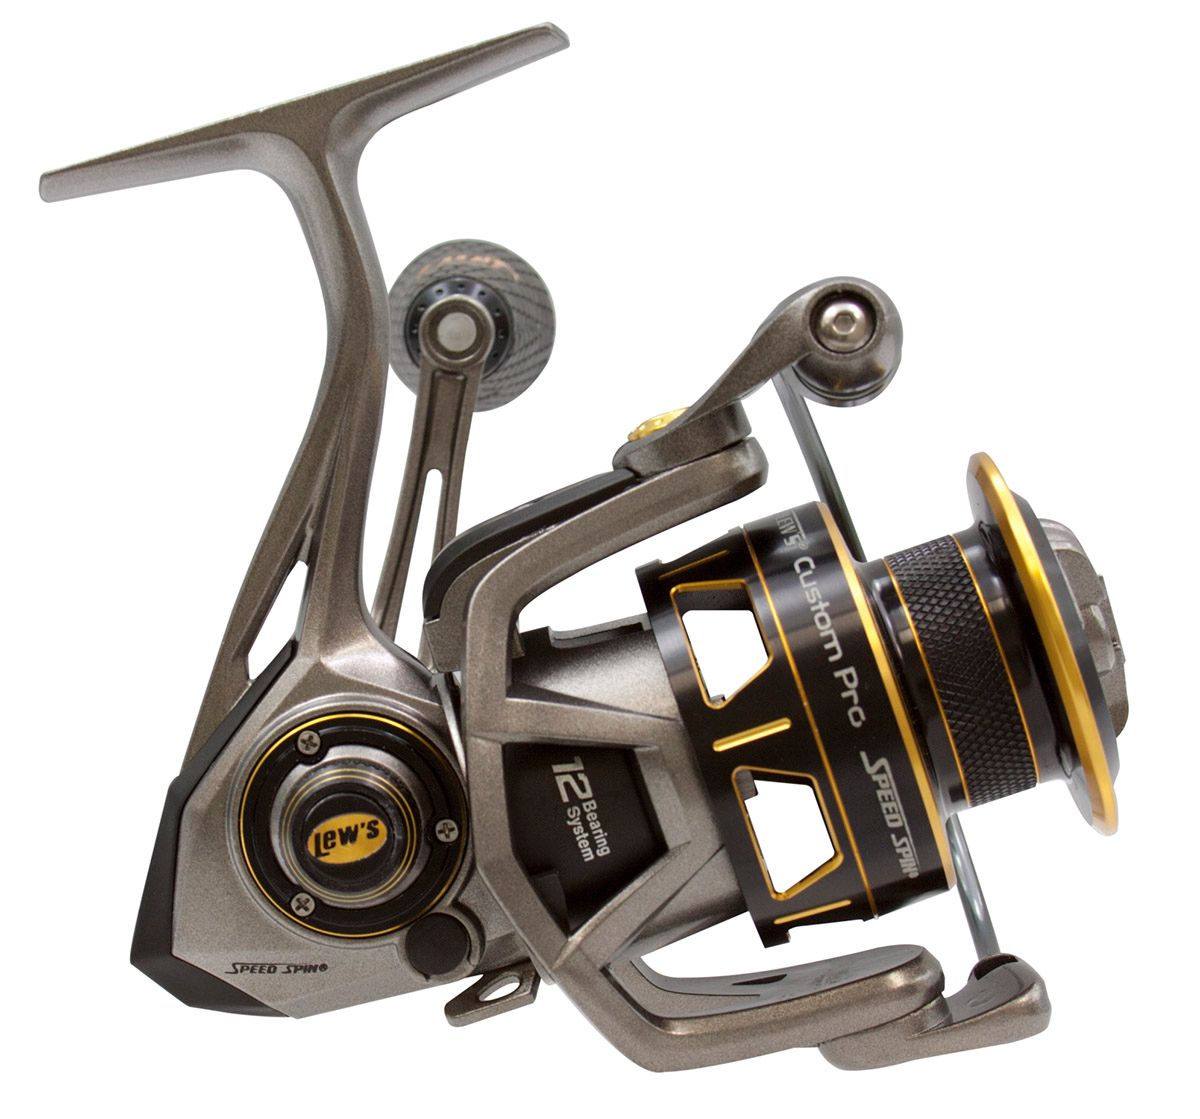 Photos - Other for Fishing Lew's Custom Pro Speed Spin Spinning Reel 18LEWUTMLWSCSTMPRREE